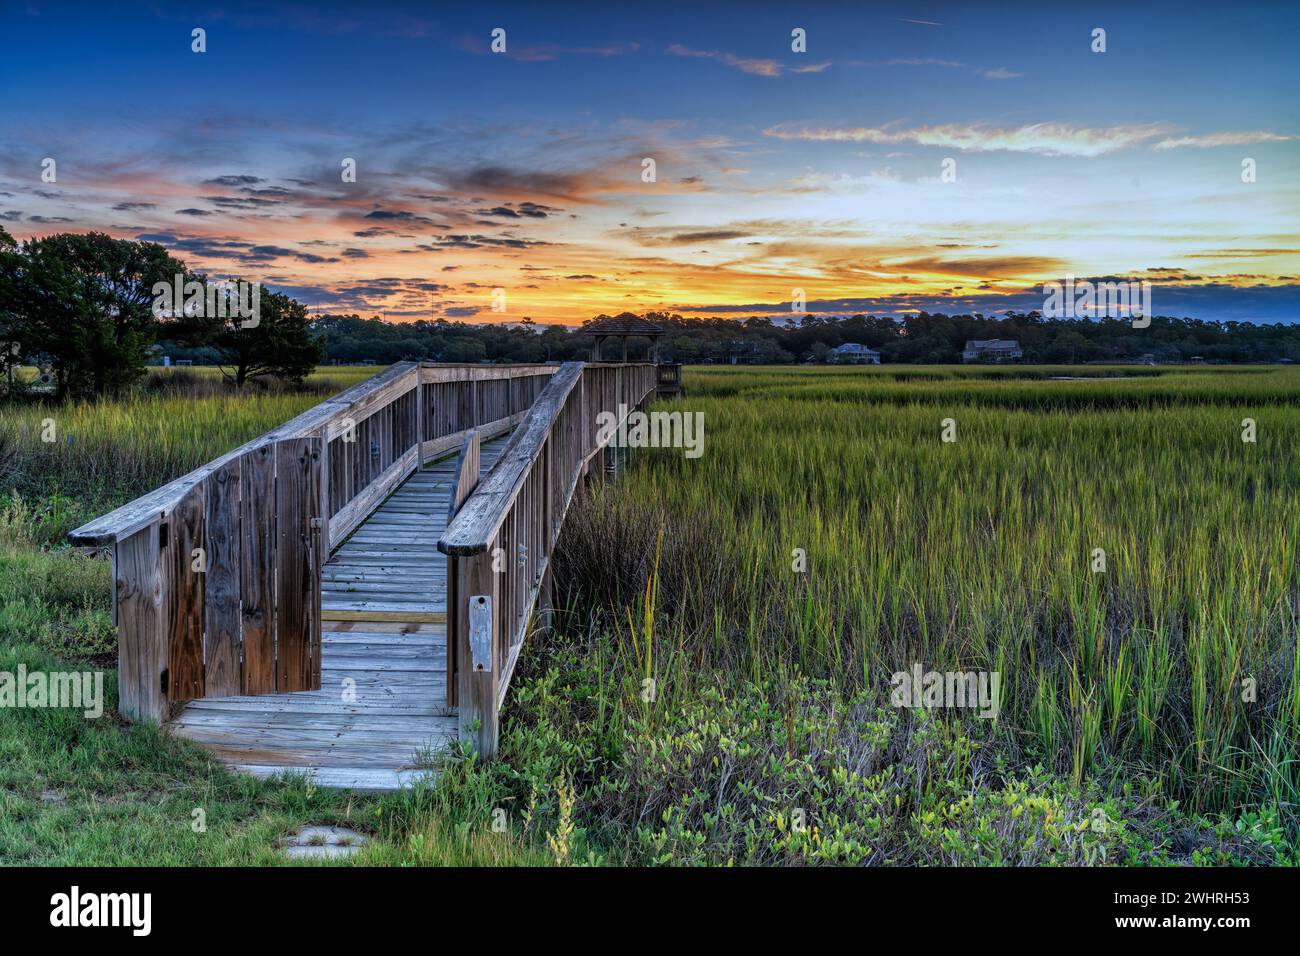 Long wooden dock on the inlet at Pawleys Island in South Carolina at usnset Stock Photo